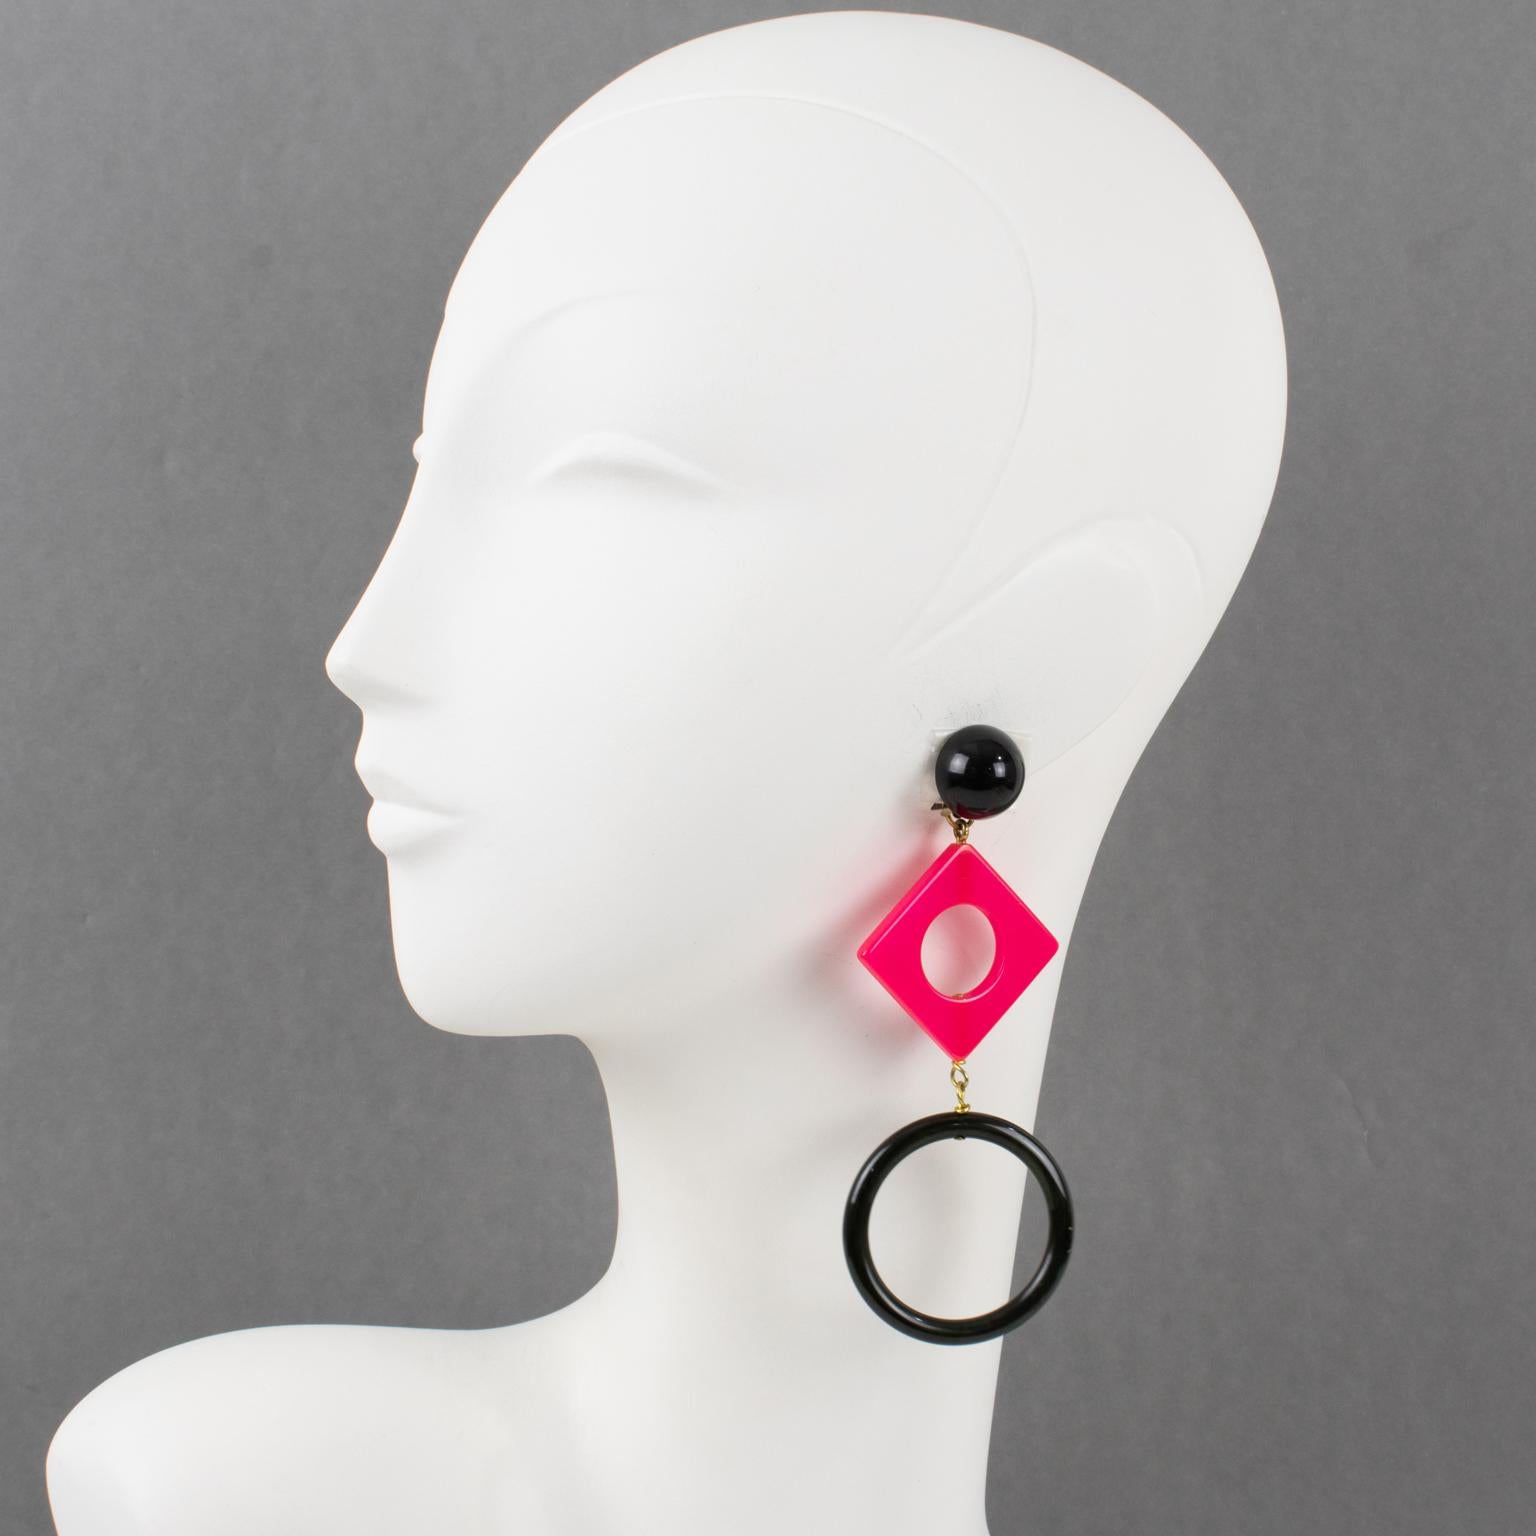 These lovely extra-long Bakelite dangling clip-on earrings with a Pop Art design style feature a shoulder-duster shape with a geometric design using square and circle forms. True licorice black is contrasted with a hot pink color. There is no